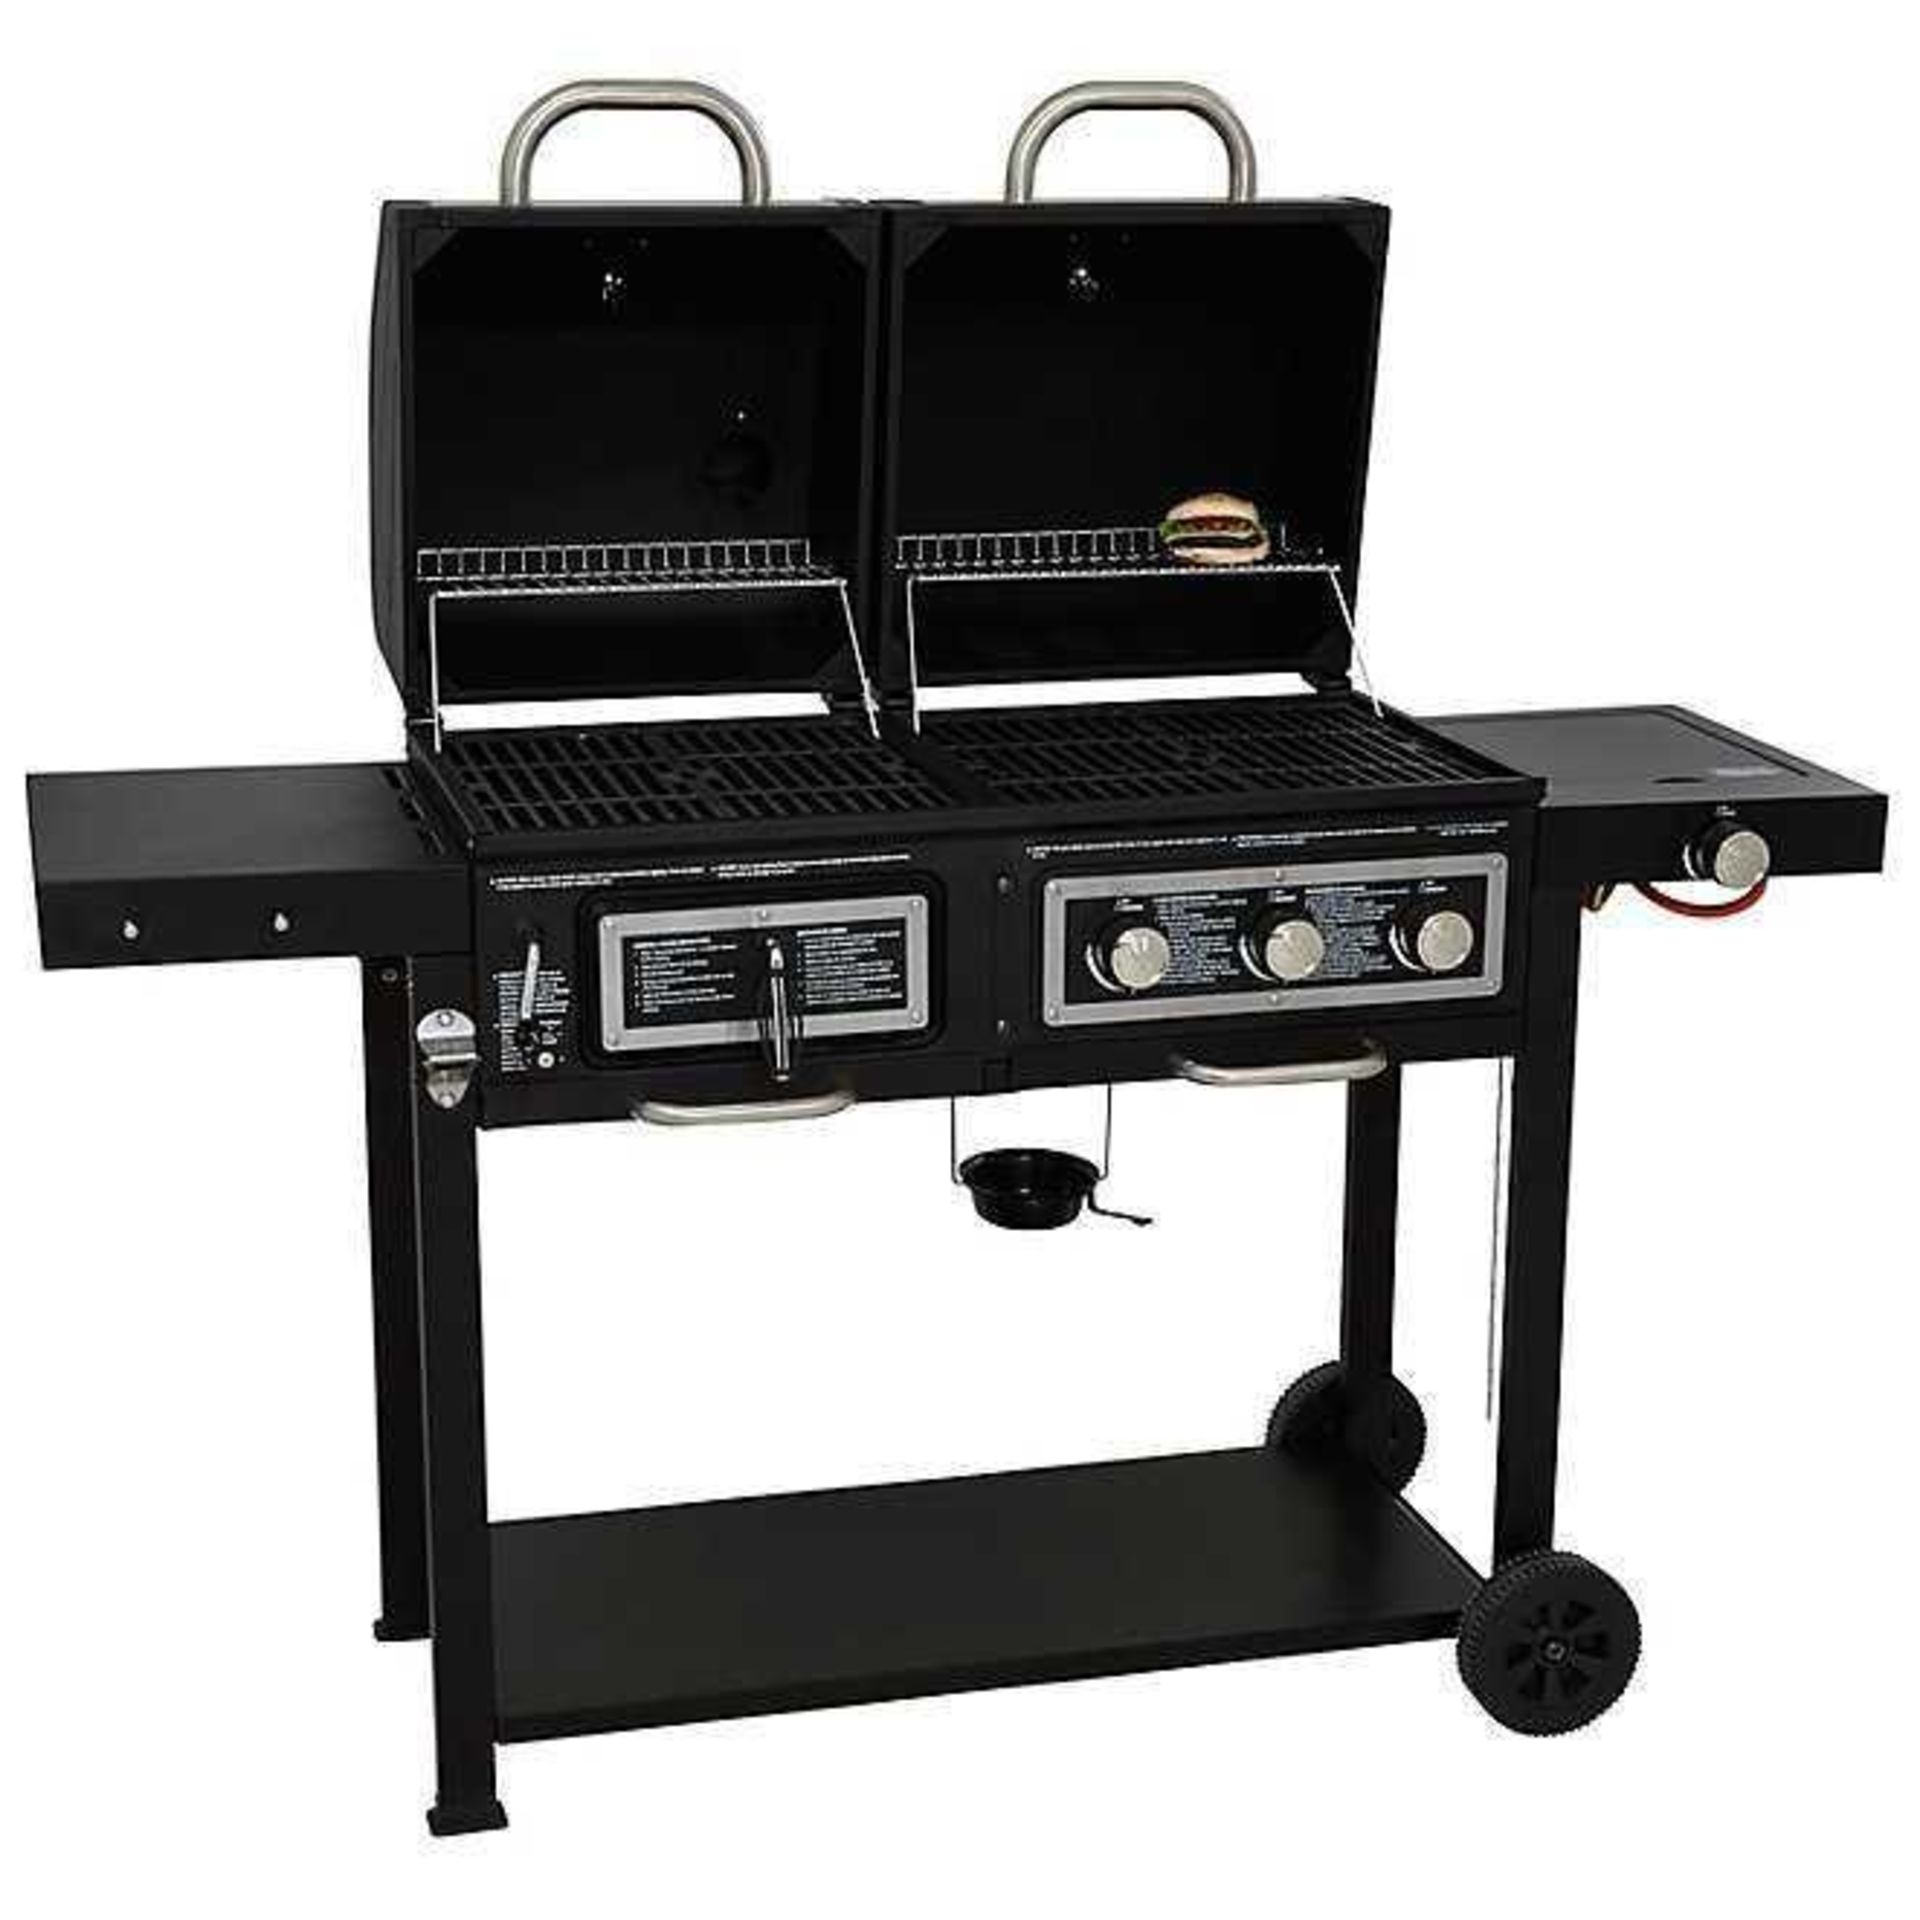 Rrp £110 Boxed Uniflame Classic Gas And Charcoal Combination Grill - Image 2 of 2